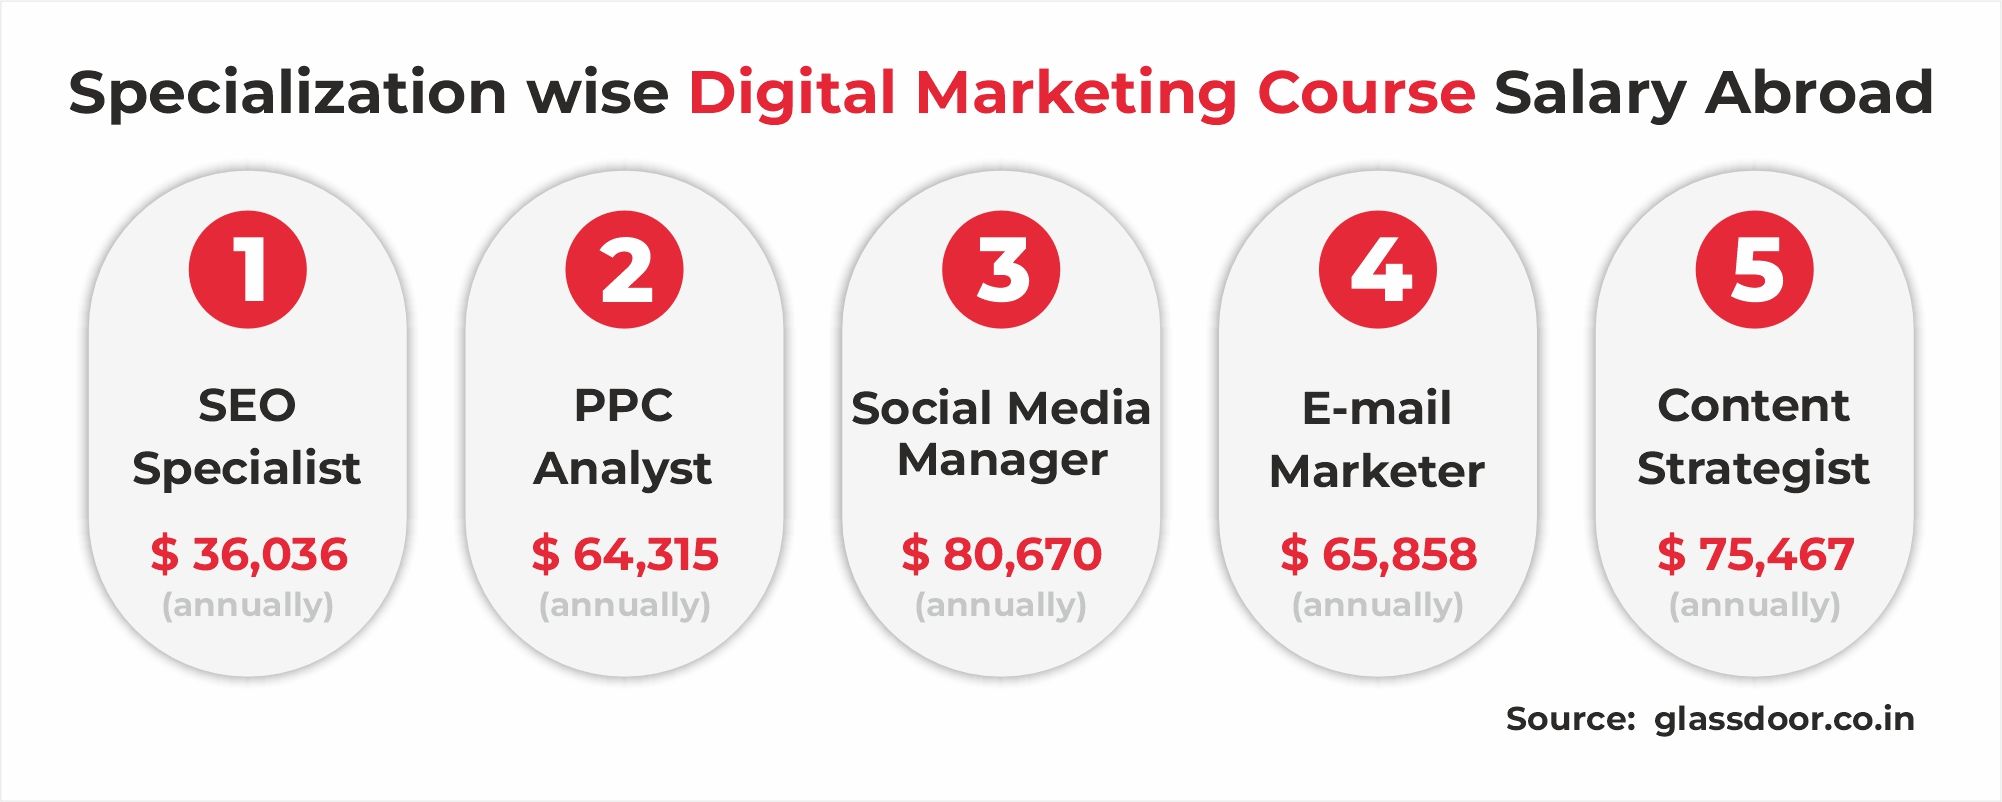 Specialization wise digital marketing course salary in Abroad